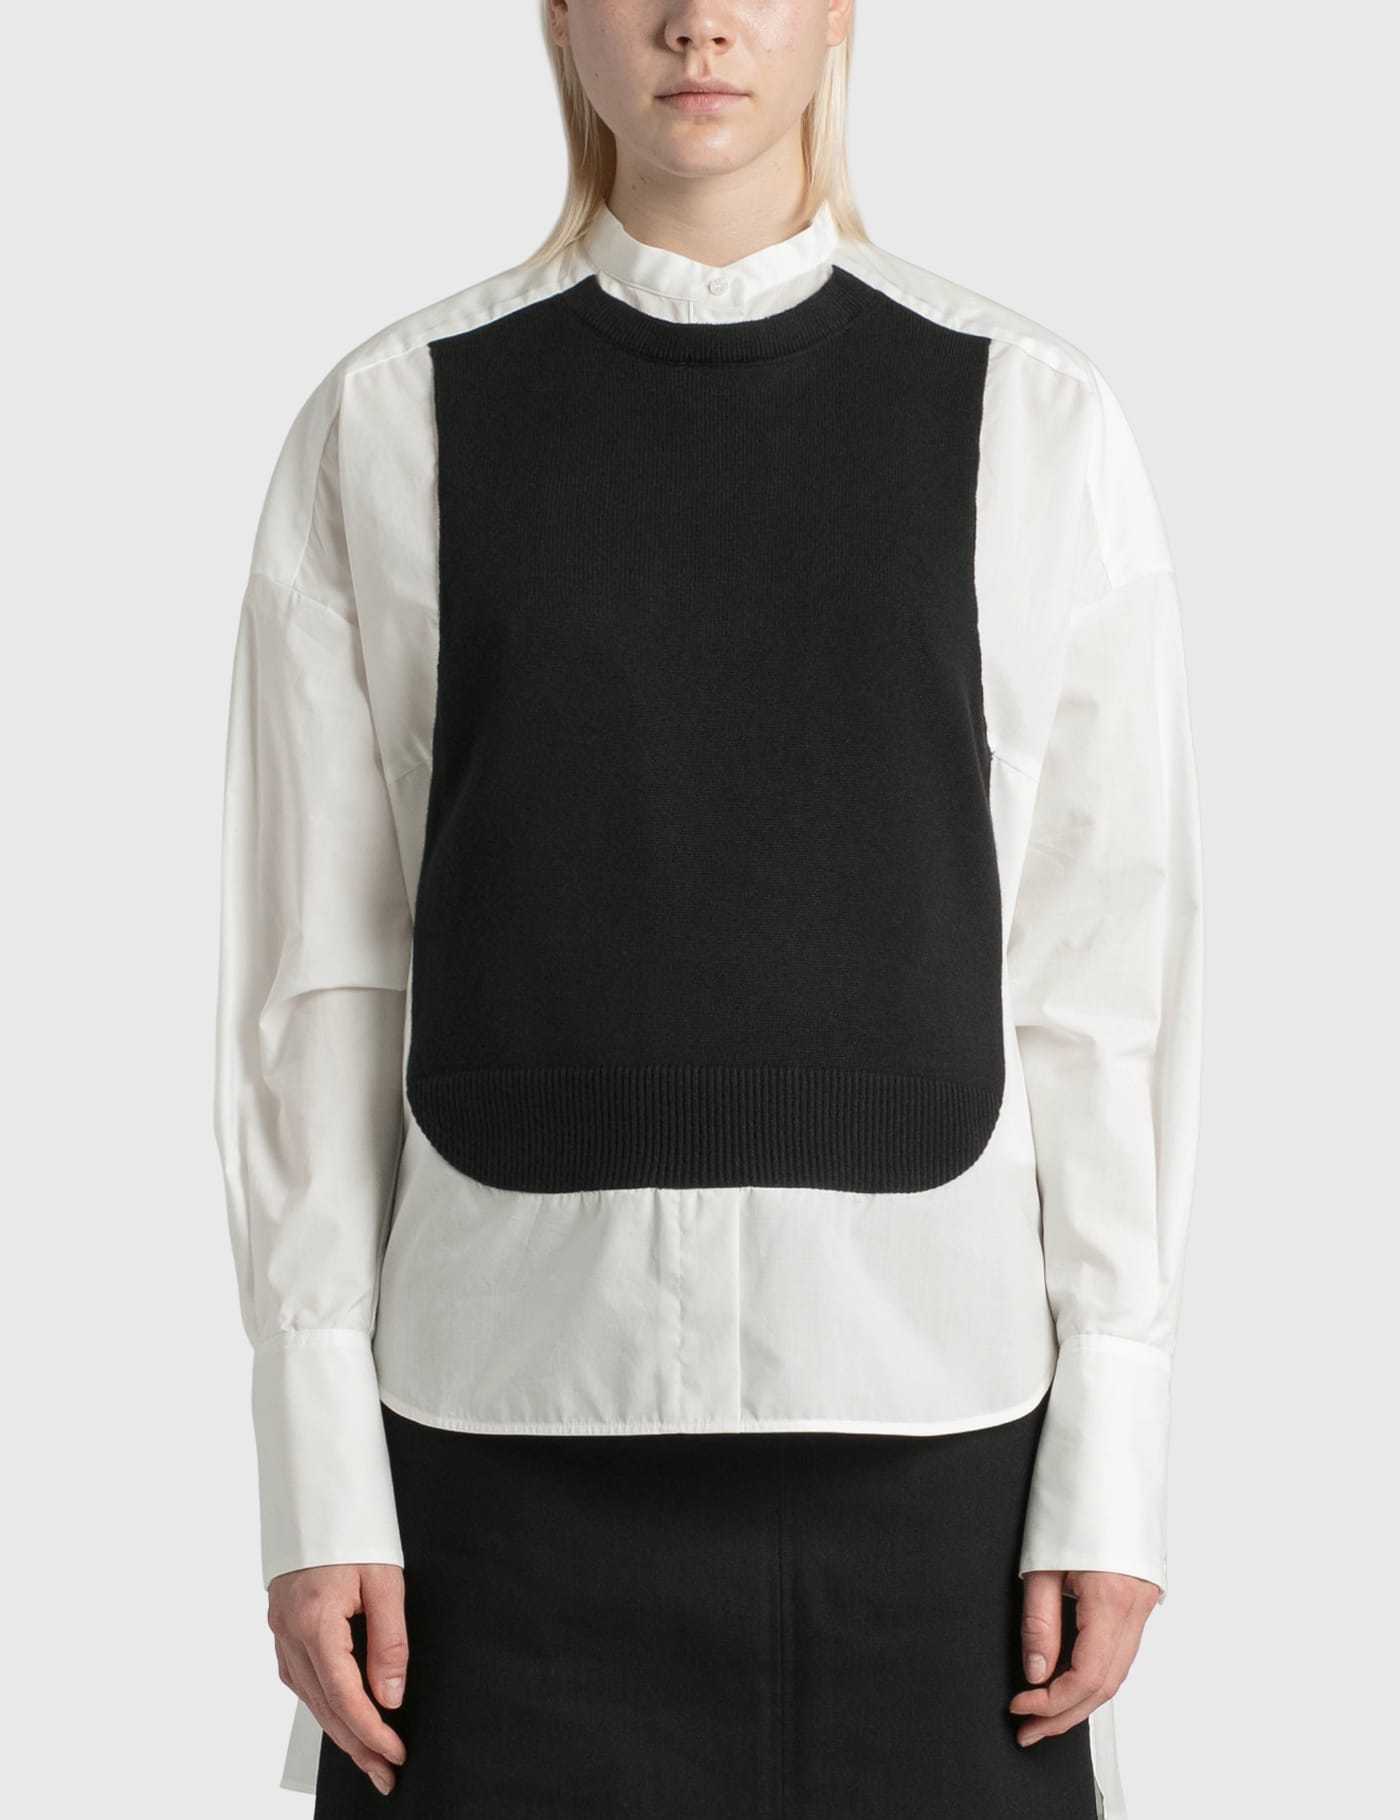 Enföld - Vest Layered Shirt | HBX - Globally Curated Fashion and